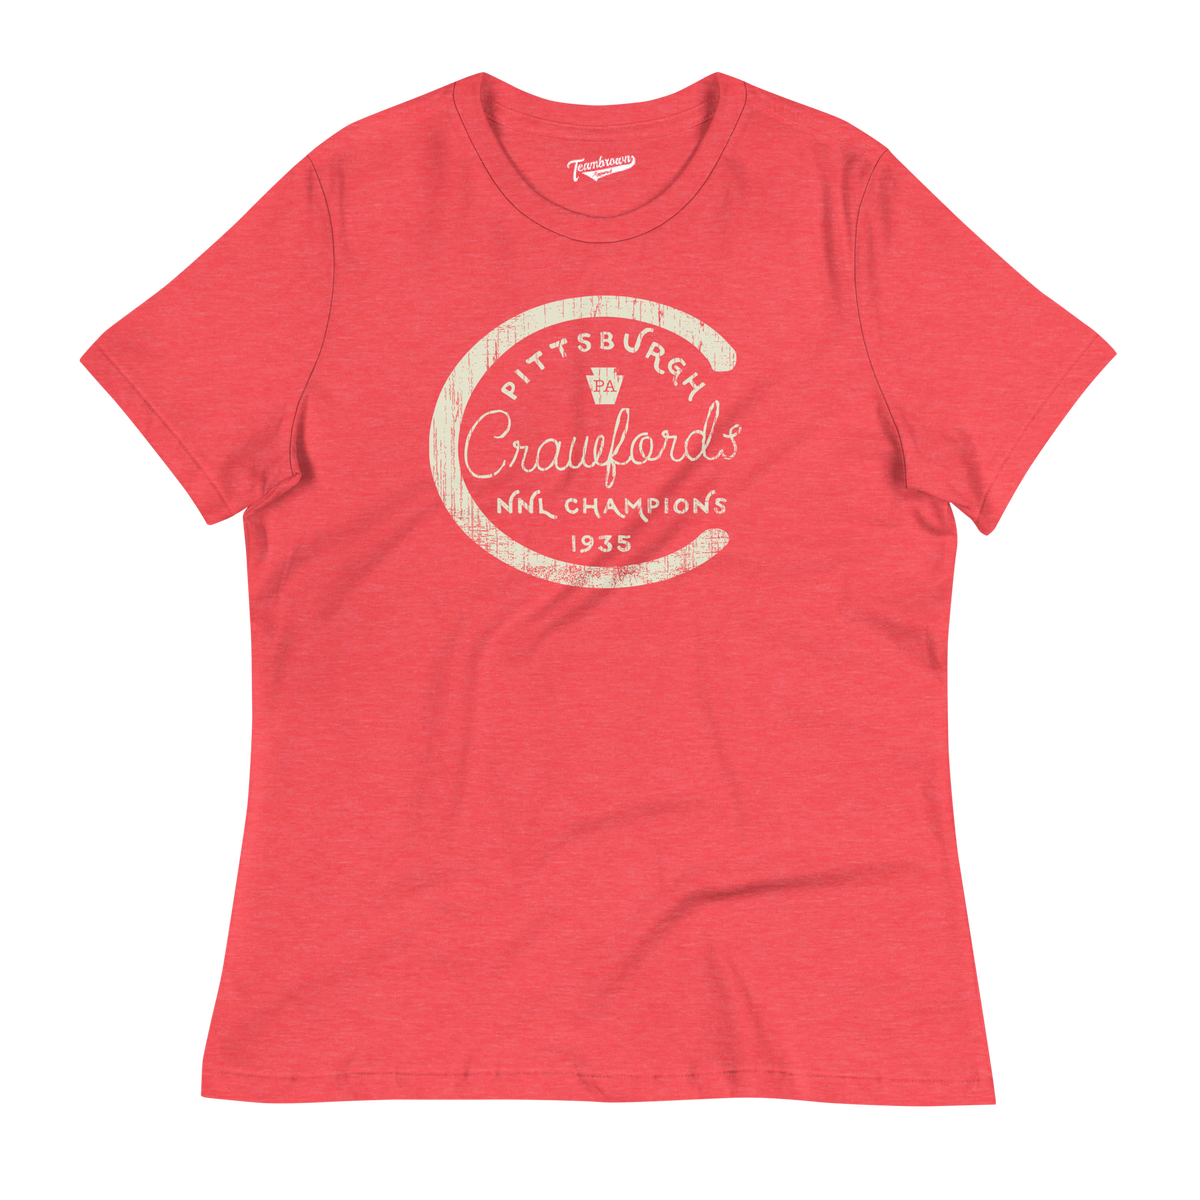 1935 Champions - Pittsburgh Crawfords - Women's Relaxed Fit T-Shirt | Officially Licensed - NLBM